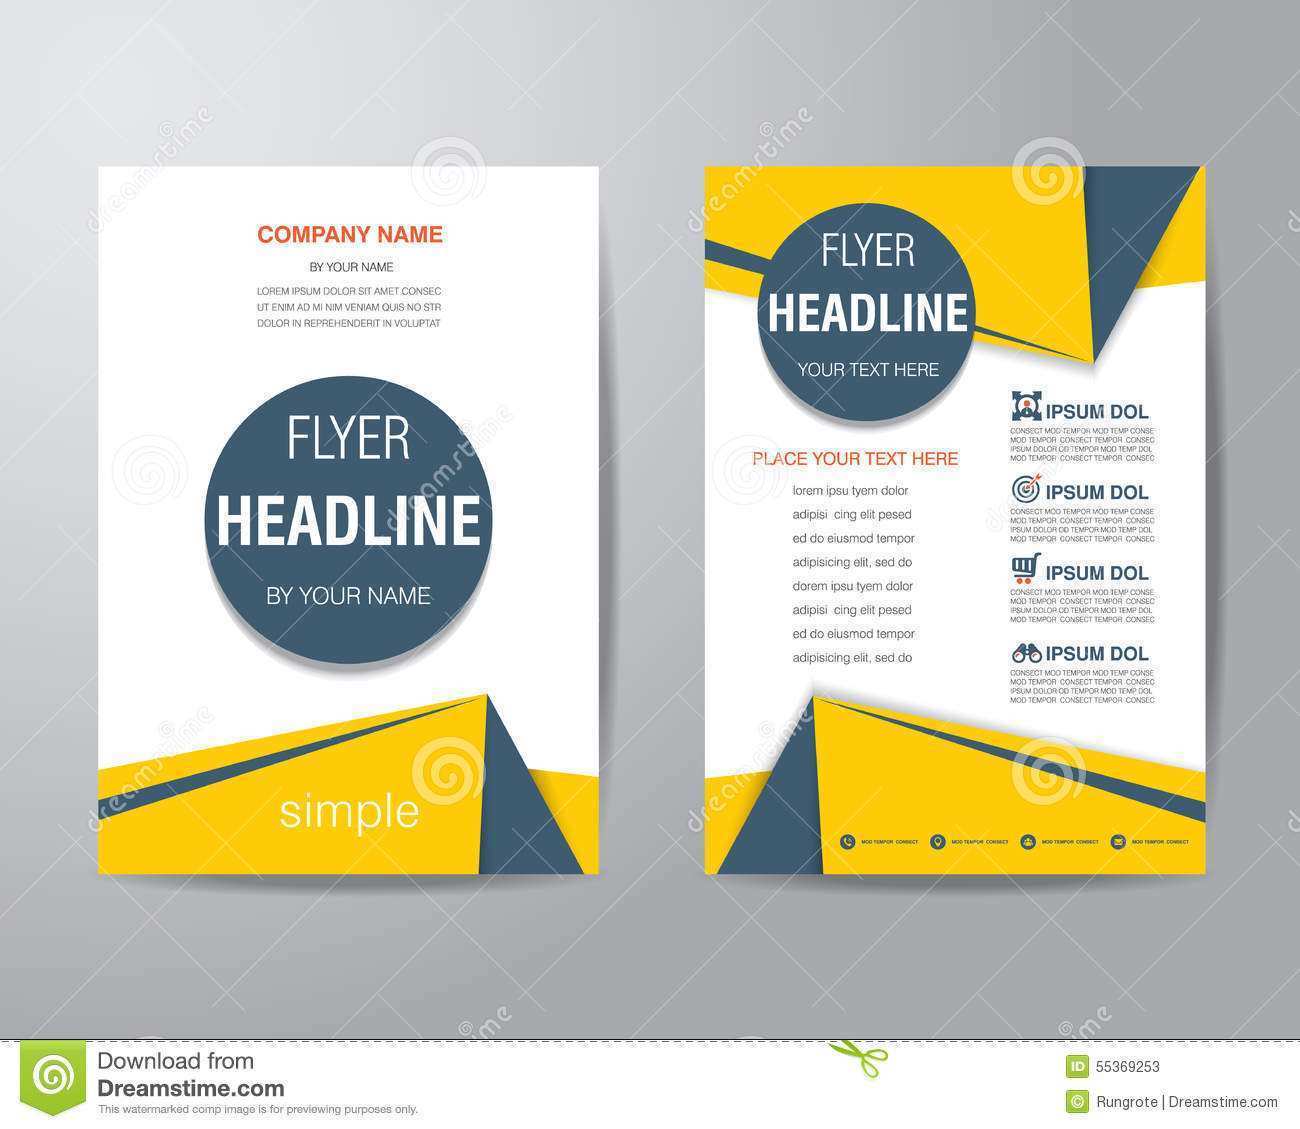 43 Online Flyer Template Design Photo by Flyer Template Design